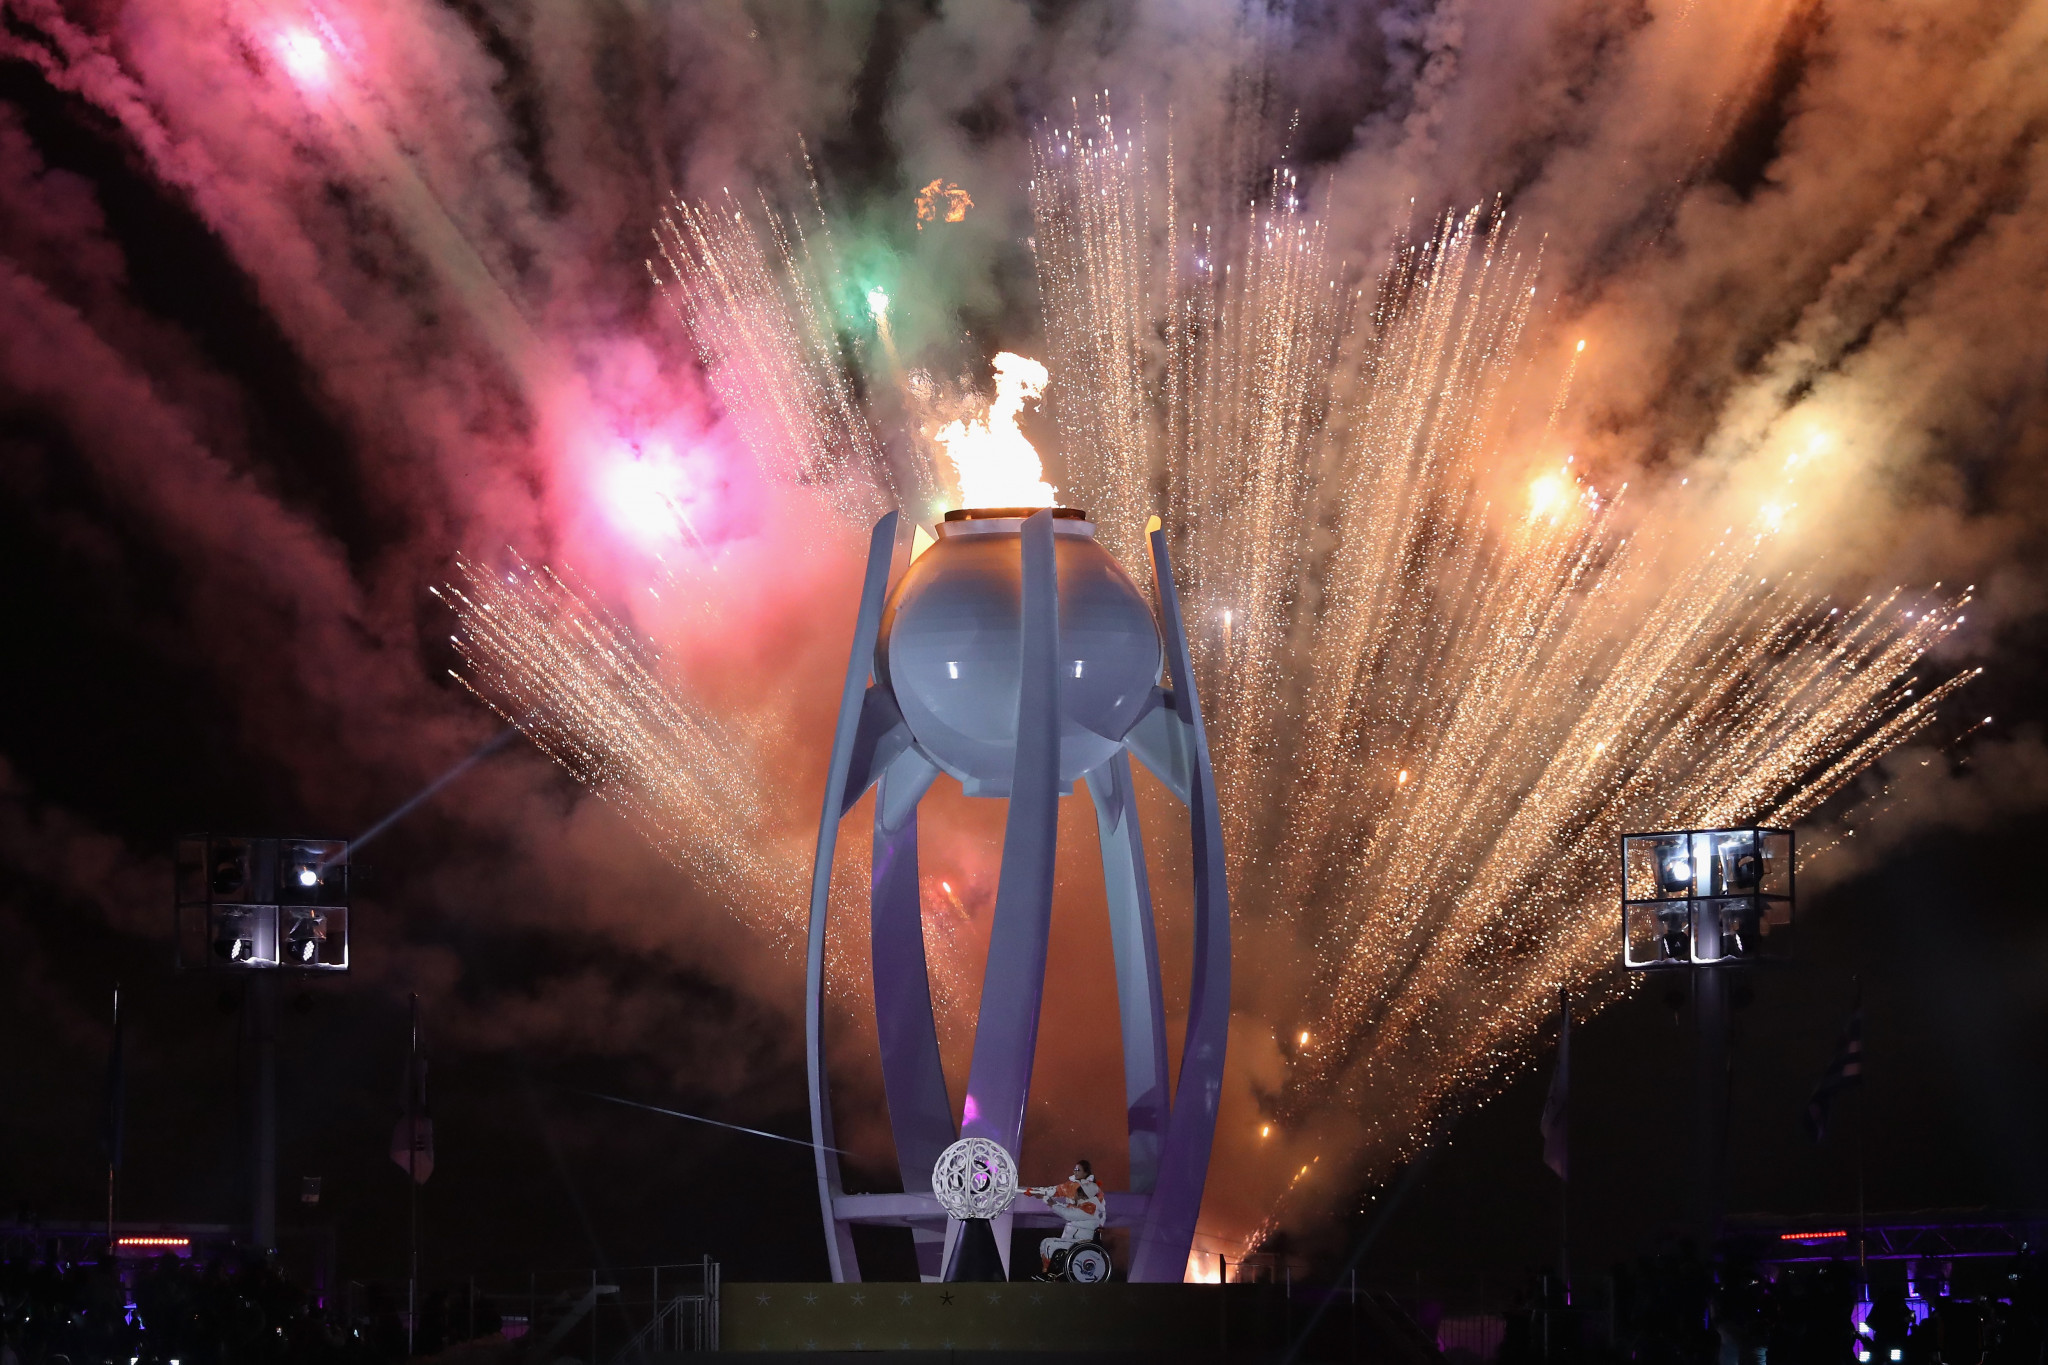 The lighting of the Paralympic Cauldron marked the end of the Pyeongchang 2018 Winter Paralympics Opening Ceremony ©Getty Images